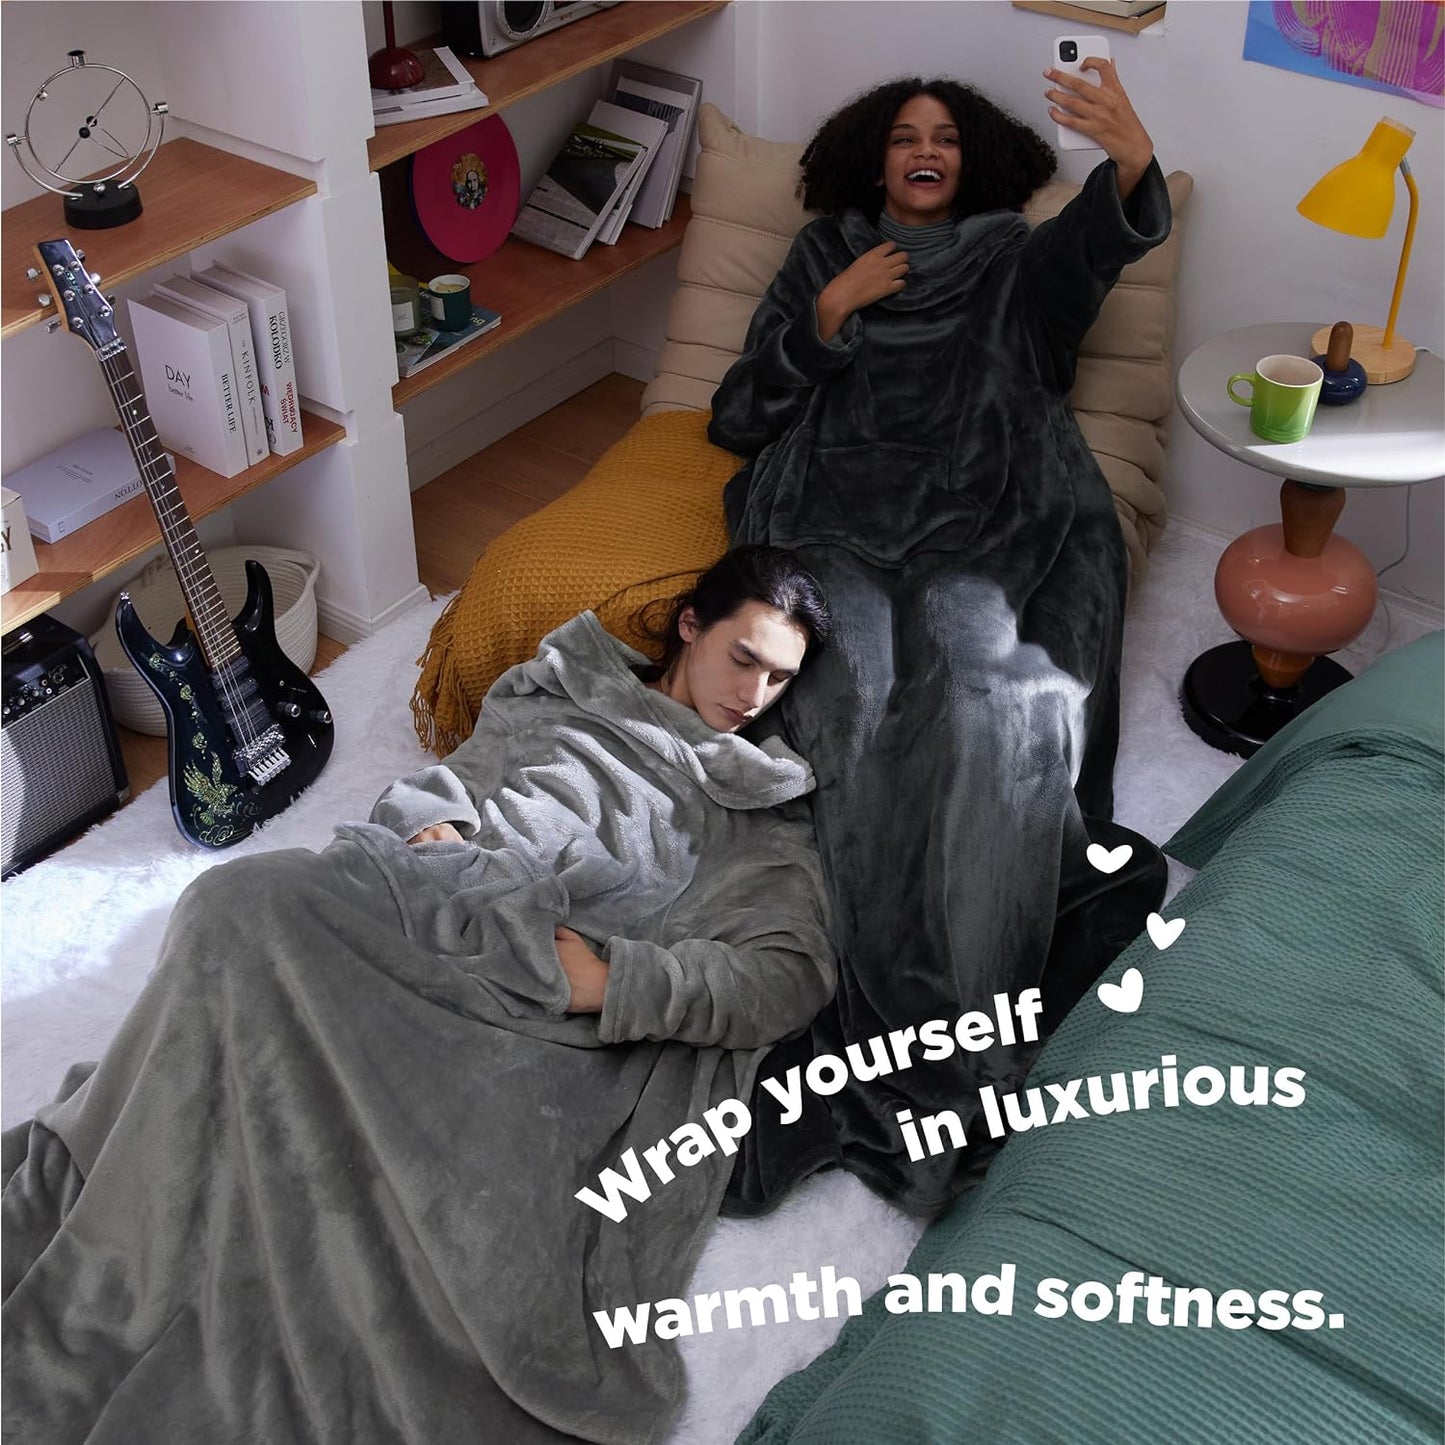 Wearable Blanket with Sleeves Women - Warm Fleece Slanket as Gifts for Her, Cosy TV Blankets with Front Pocket for Adults Men, Grey, 150 X 200 Cm